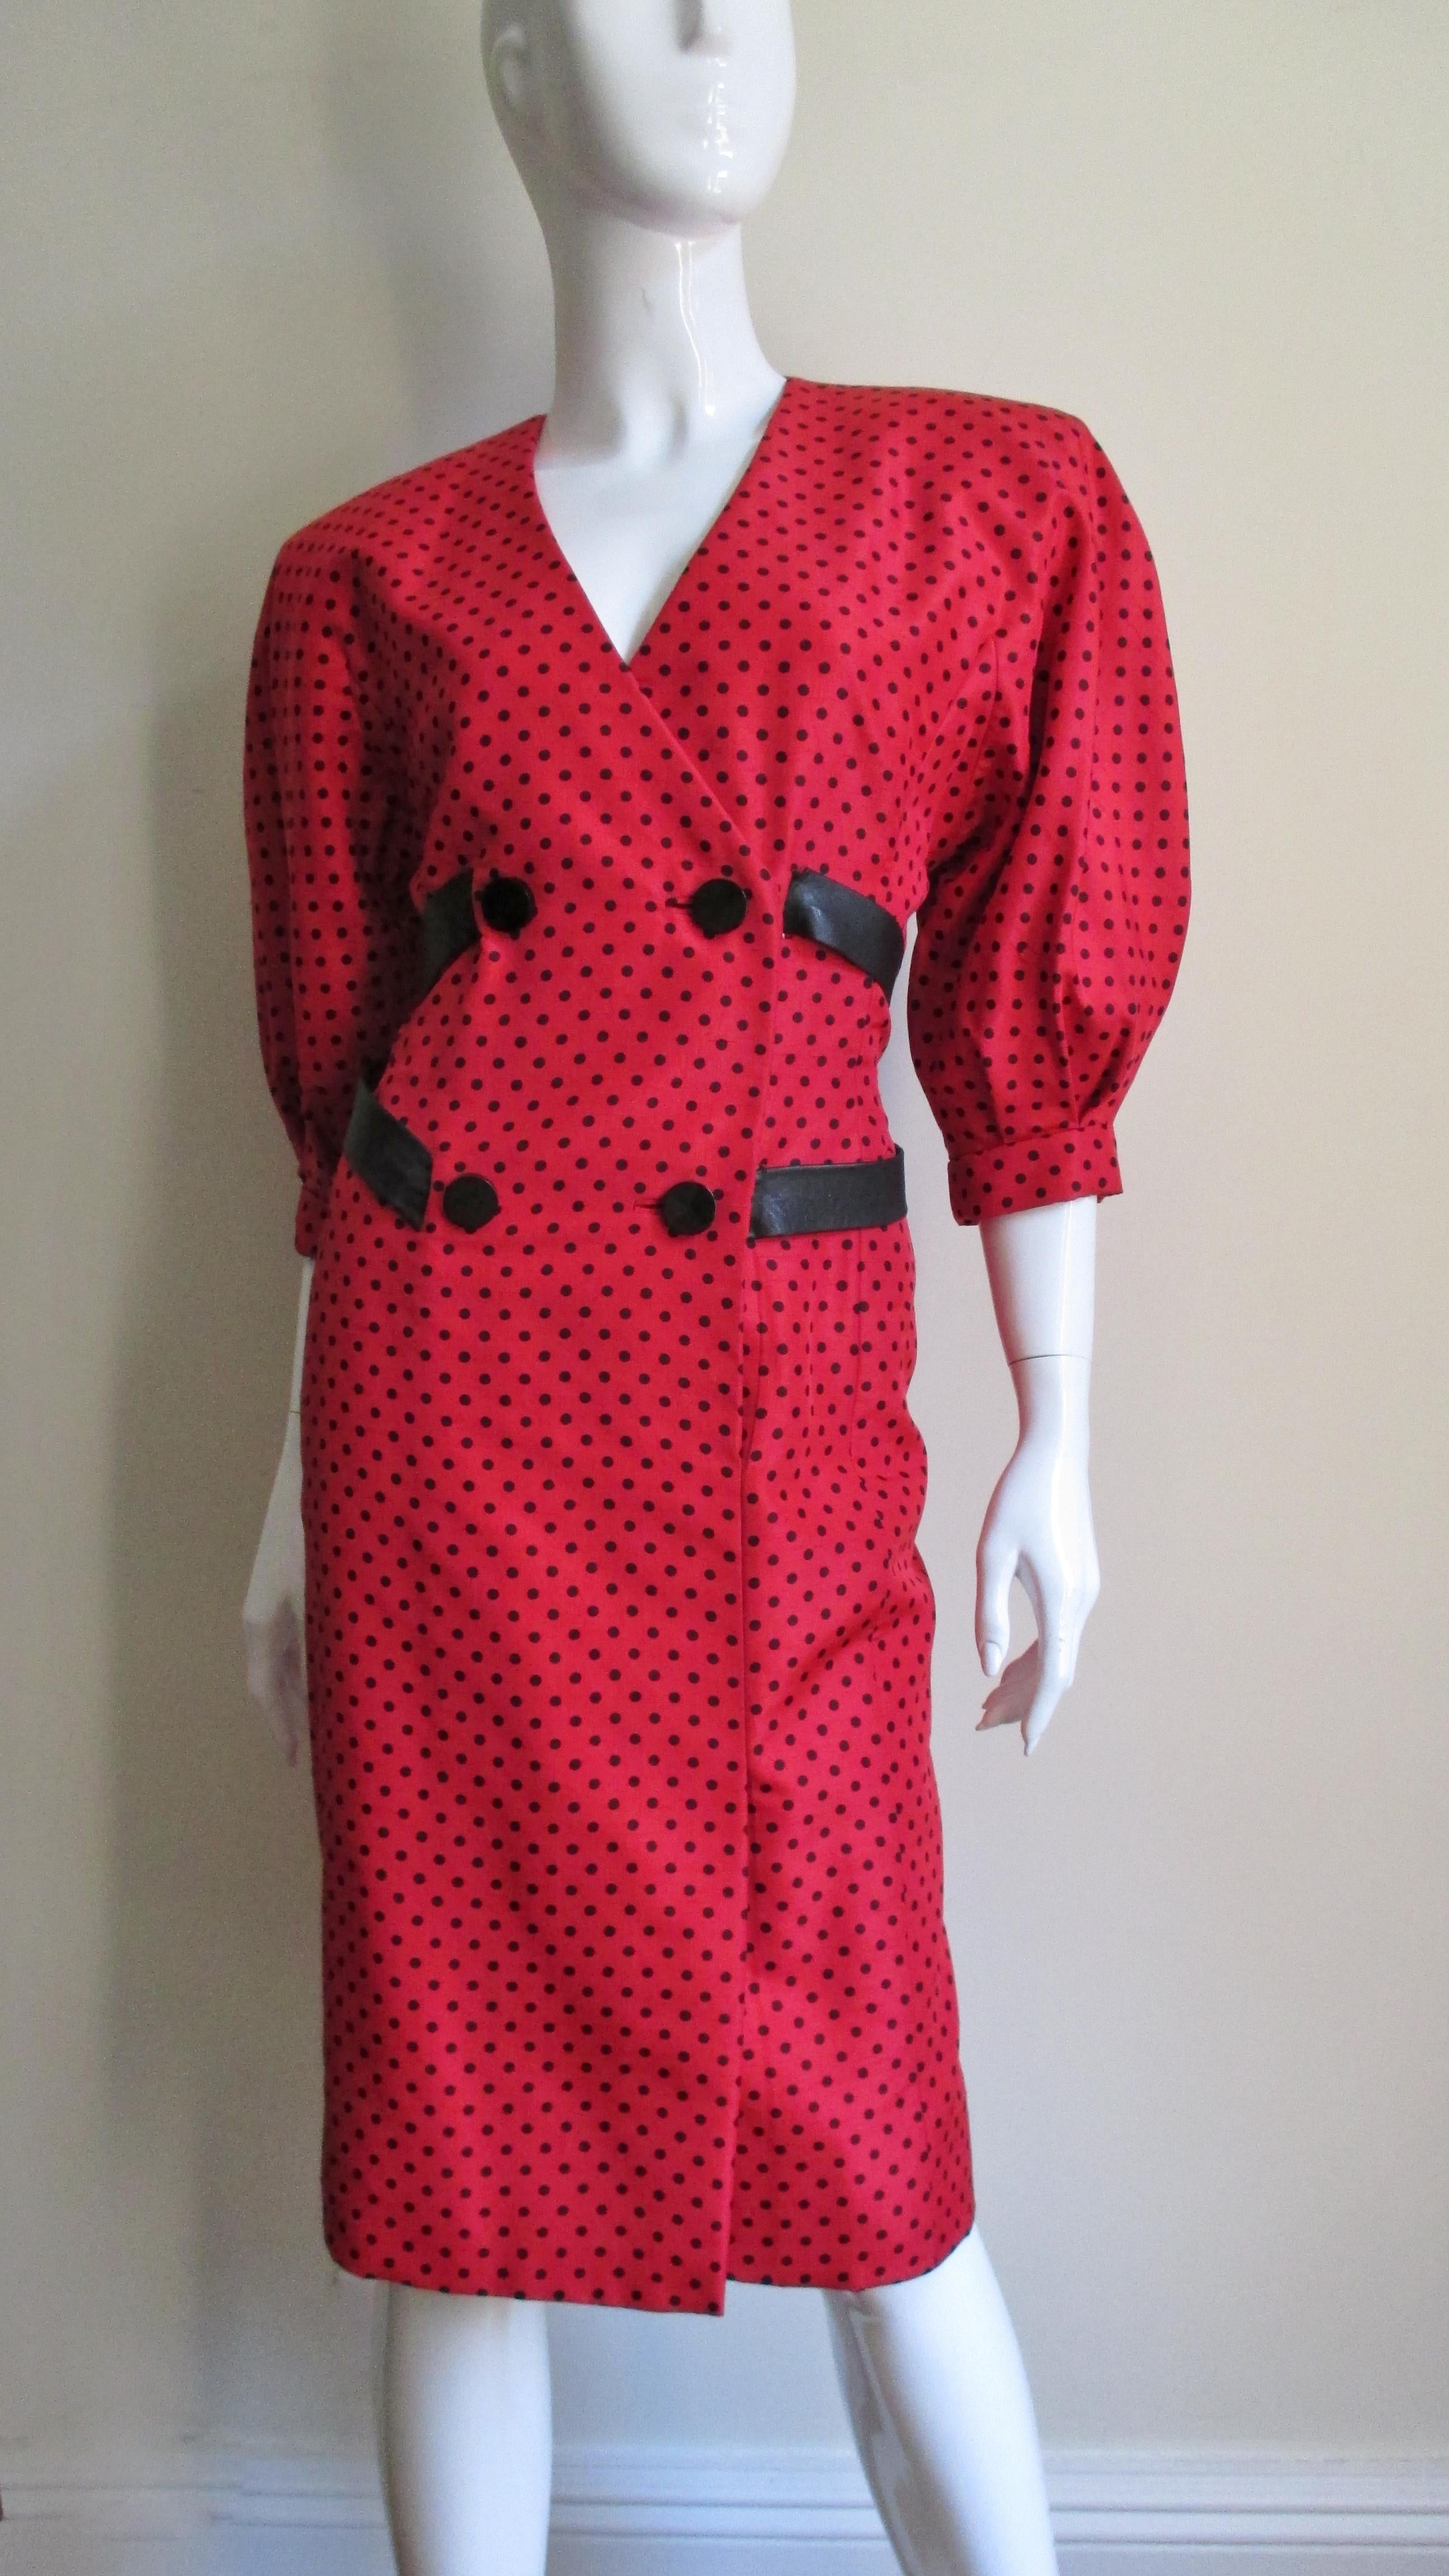 Jacqueline de Ribes Silk Dress With Leather Straps 1980s For Sale 1